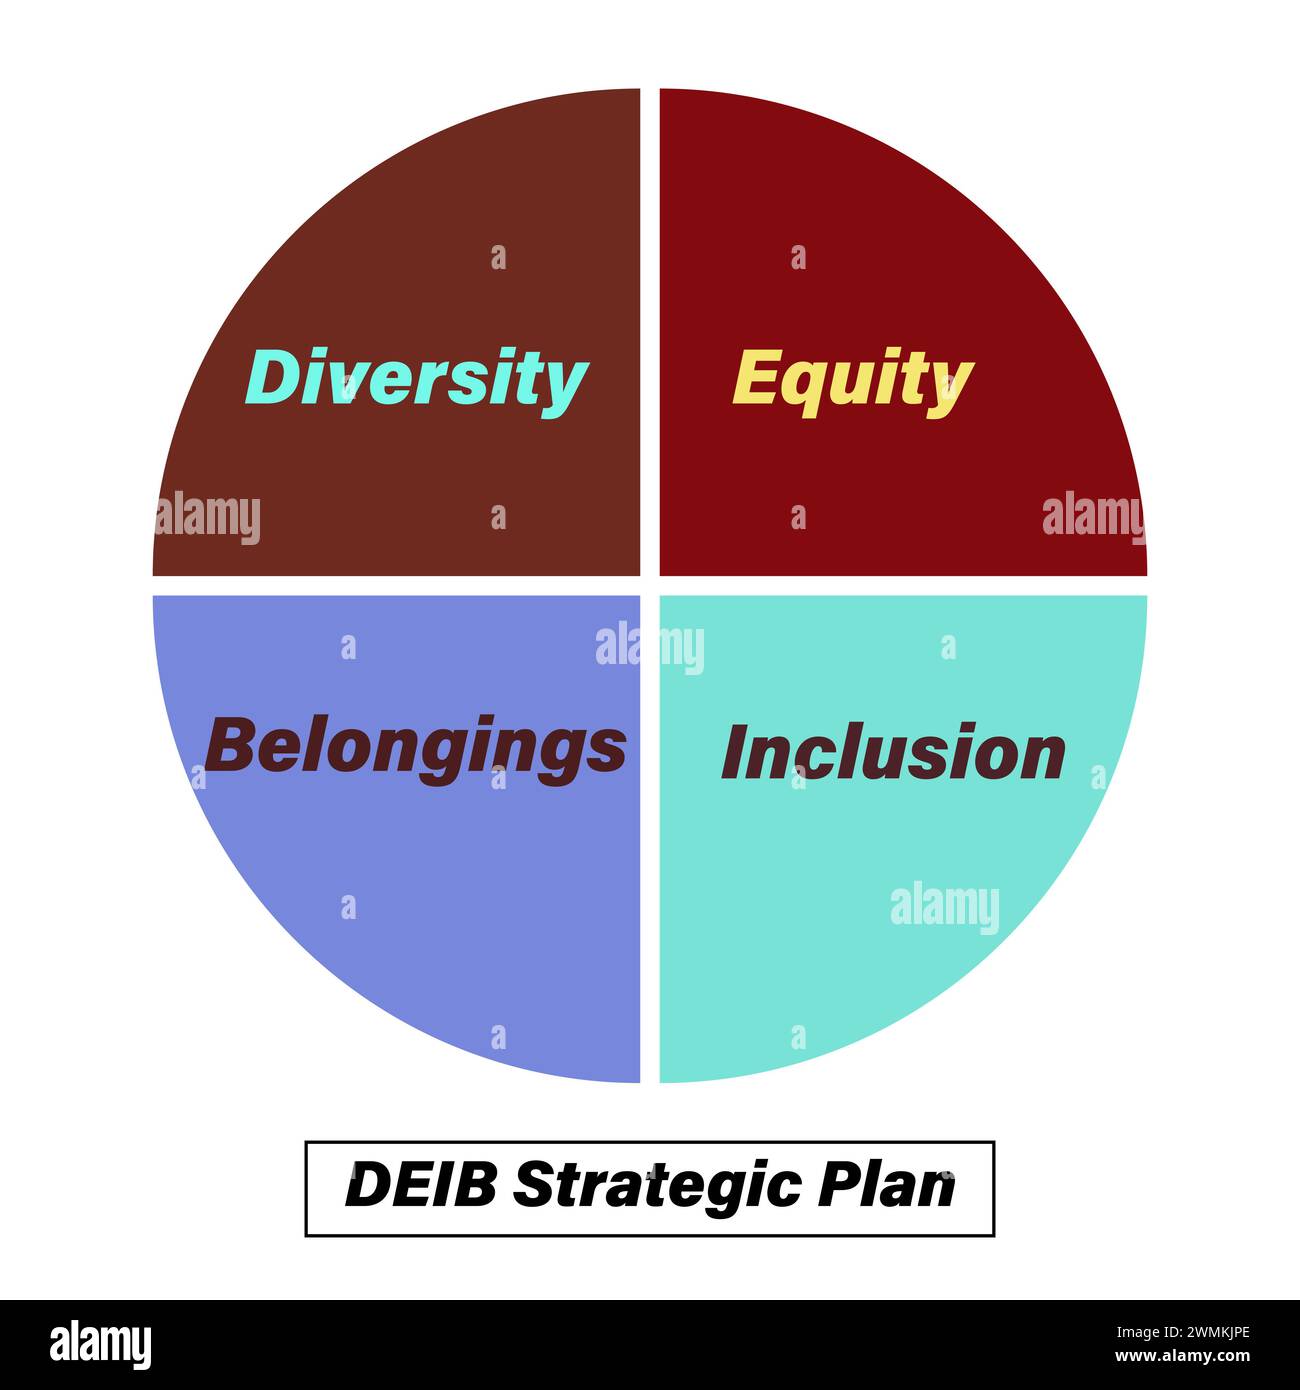 Diversity, Equity, Belongings, Inclusion in an infographic Deib Strategic Plan. Stock Vector